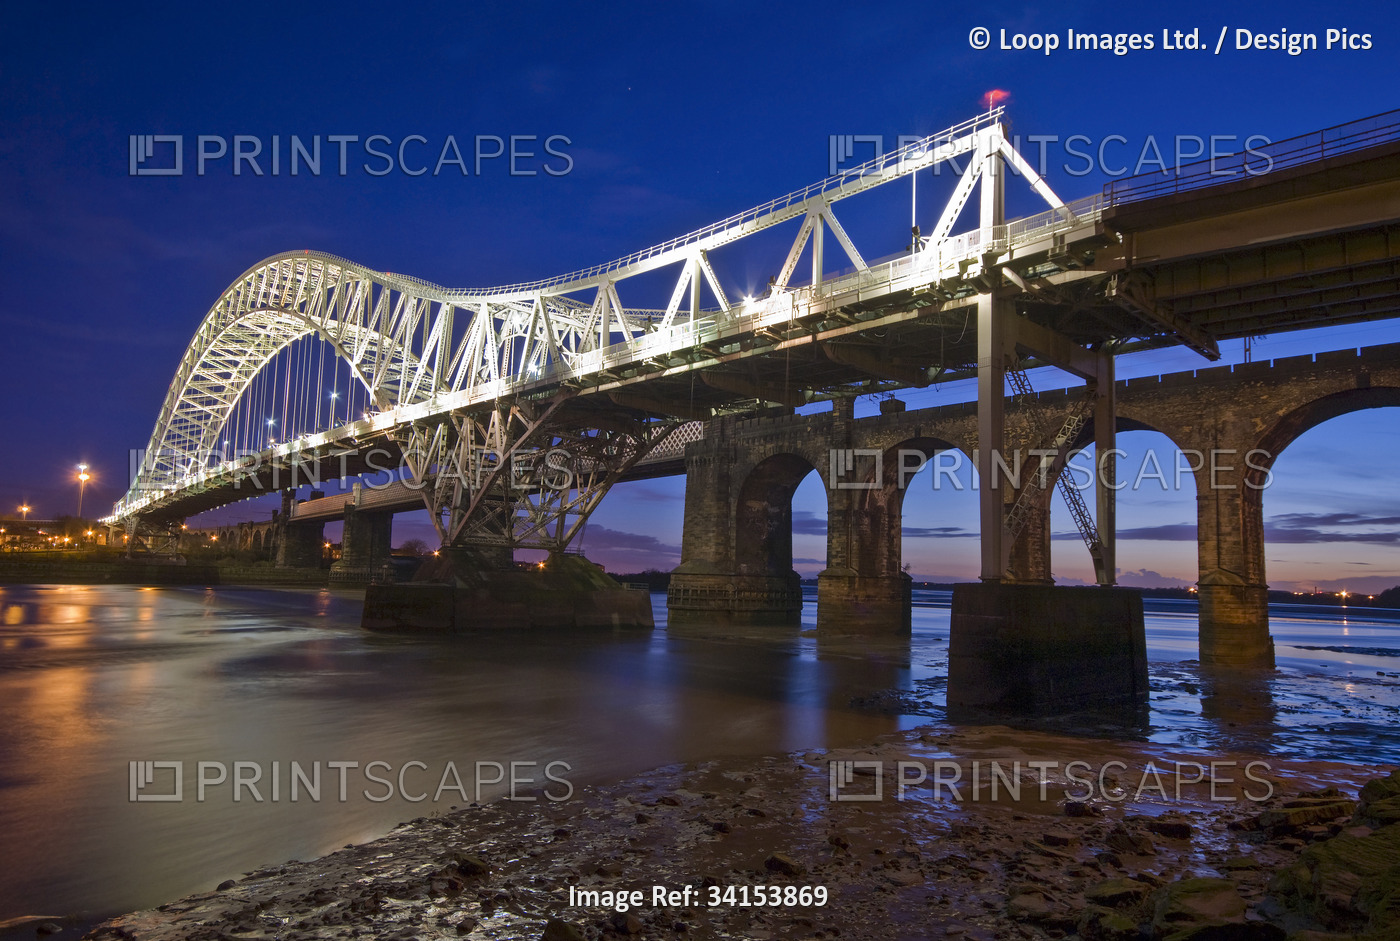 The Runcorn and Widnes transporter bridge over the River Mersey at night.